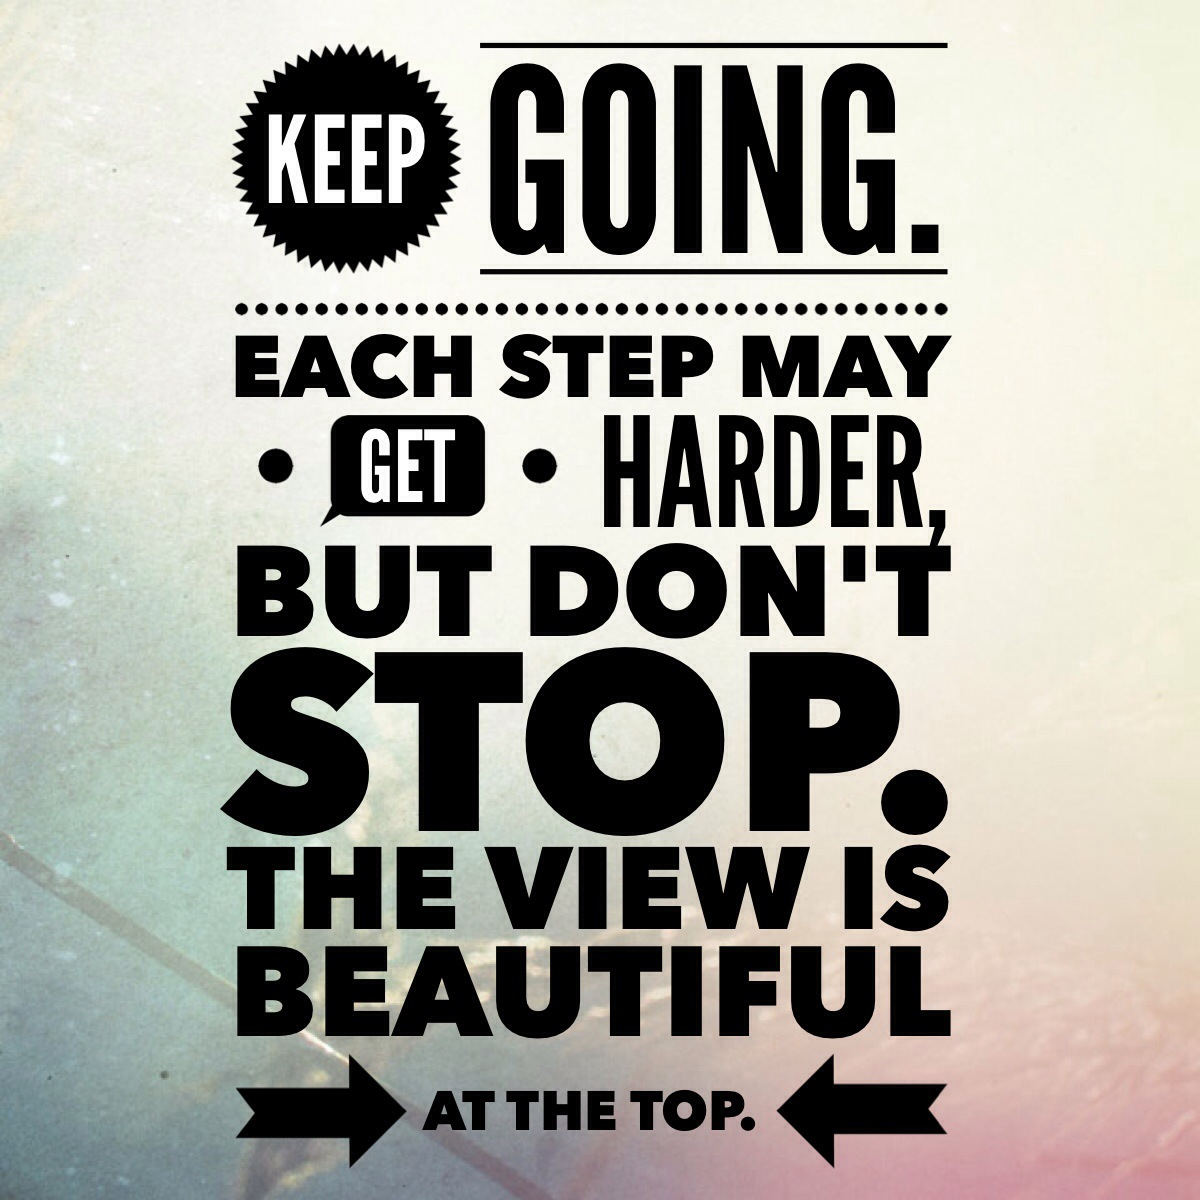 Keep going. Each step may get harder, but don't stop. The view is beautiful from the top quote motivation success